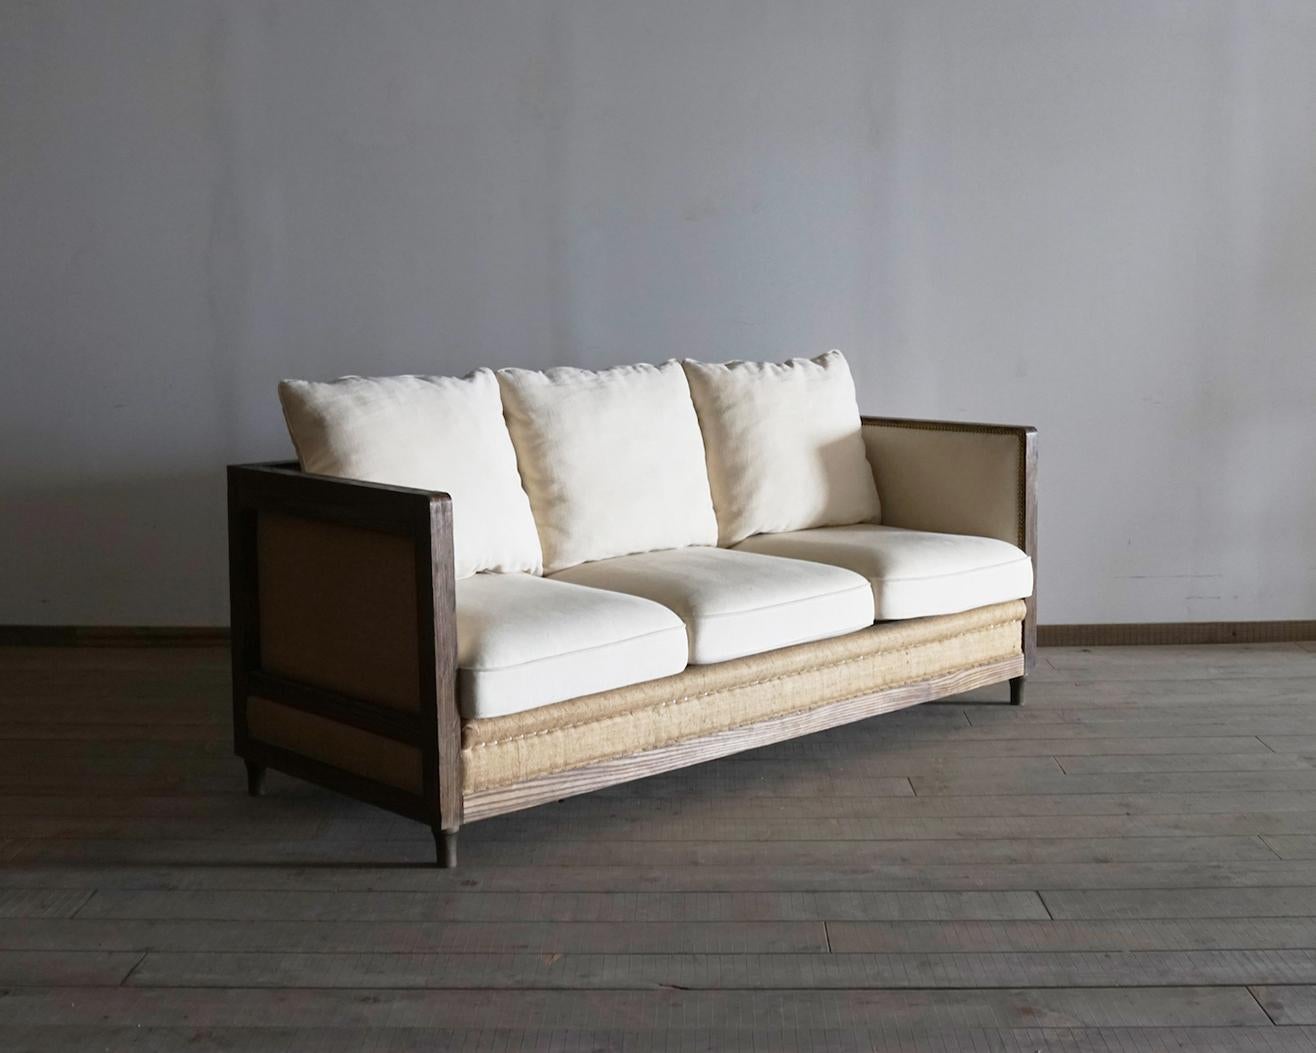 A large armrest, a wide seat and a solid, reliable shape. The Nude sofa attracts everyone who sits on it and everyone who sees it. It has the presence of an old hotel and a classical design that will add a touch of class to your living room. After a